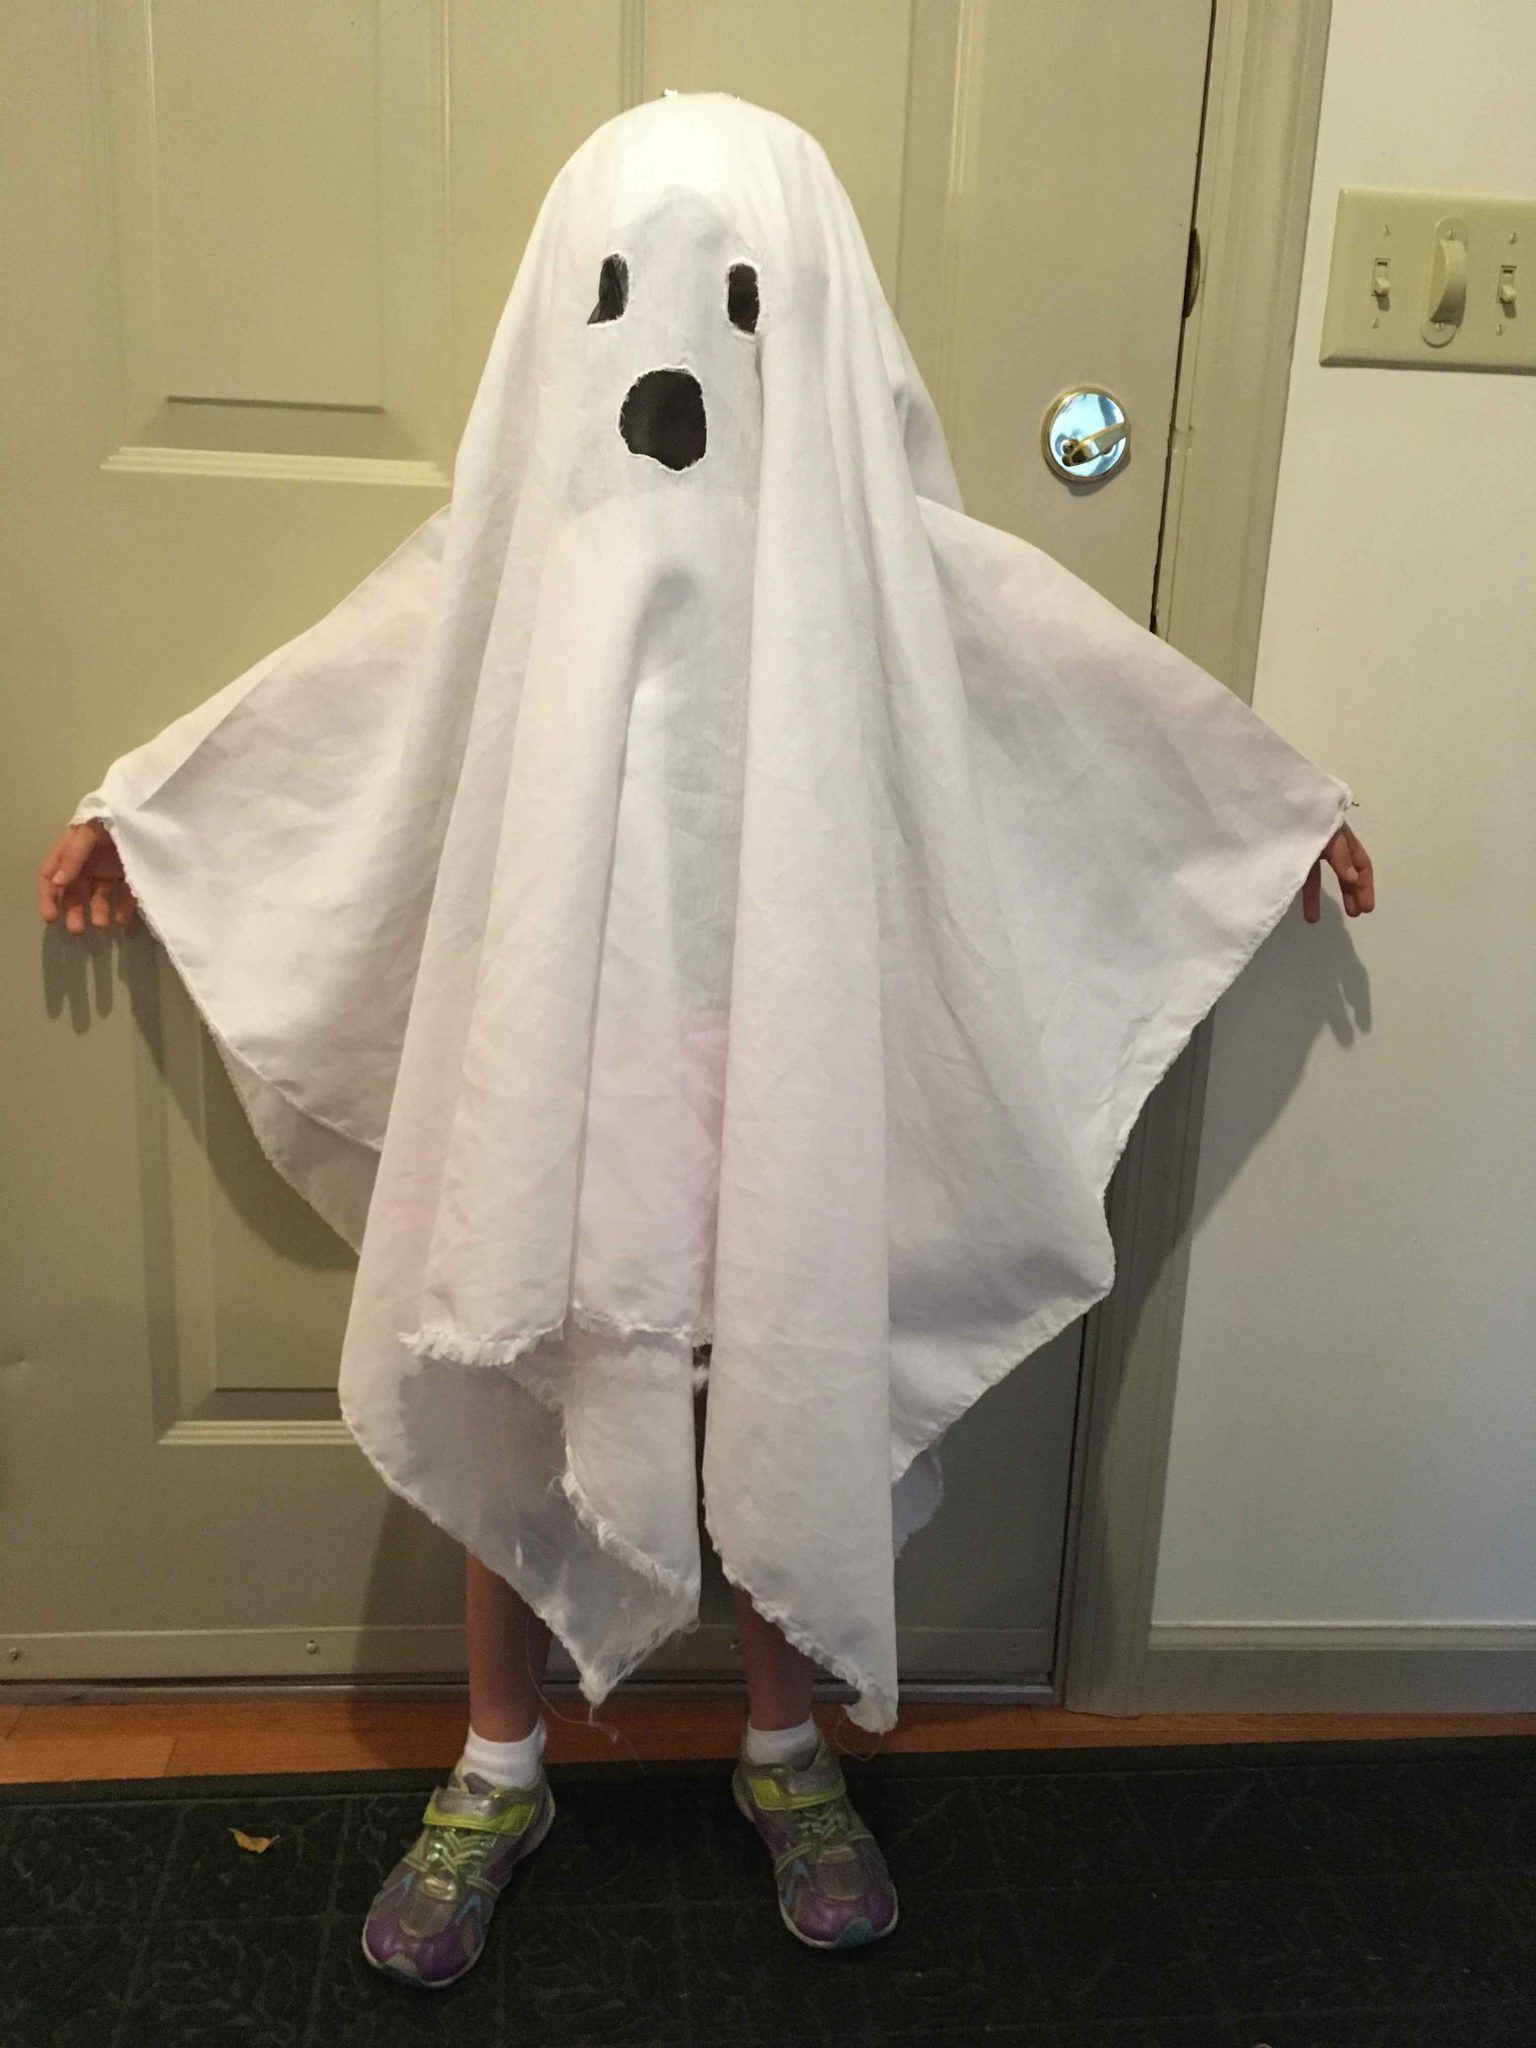 DIY Ghost Costume For Toddler
 How To Make A Ghost Costume It s Harder Than You d Think